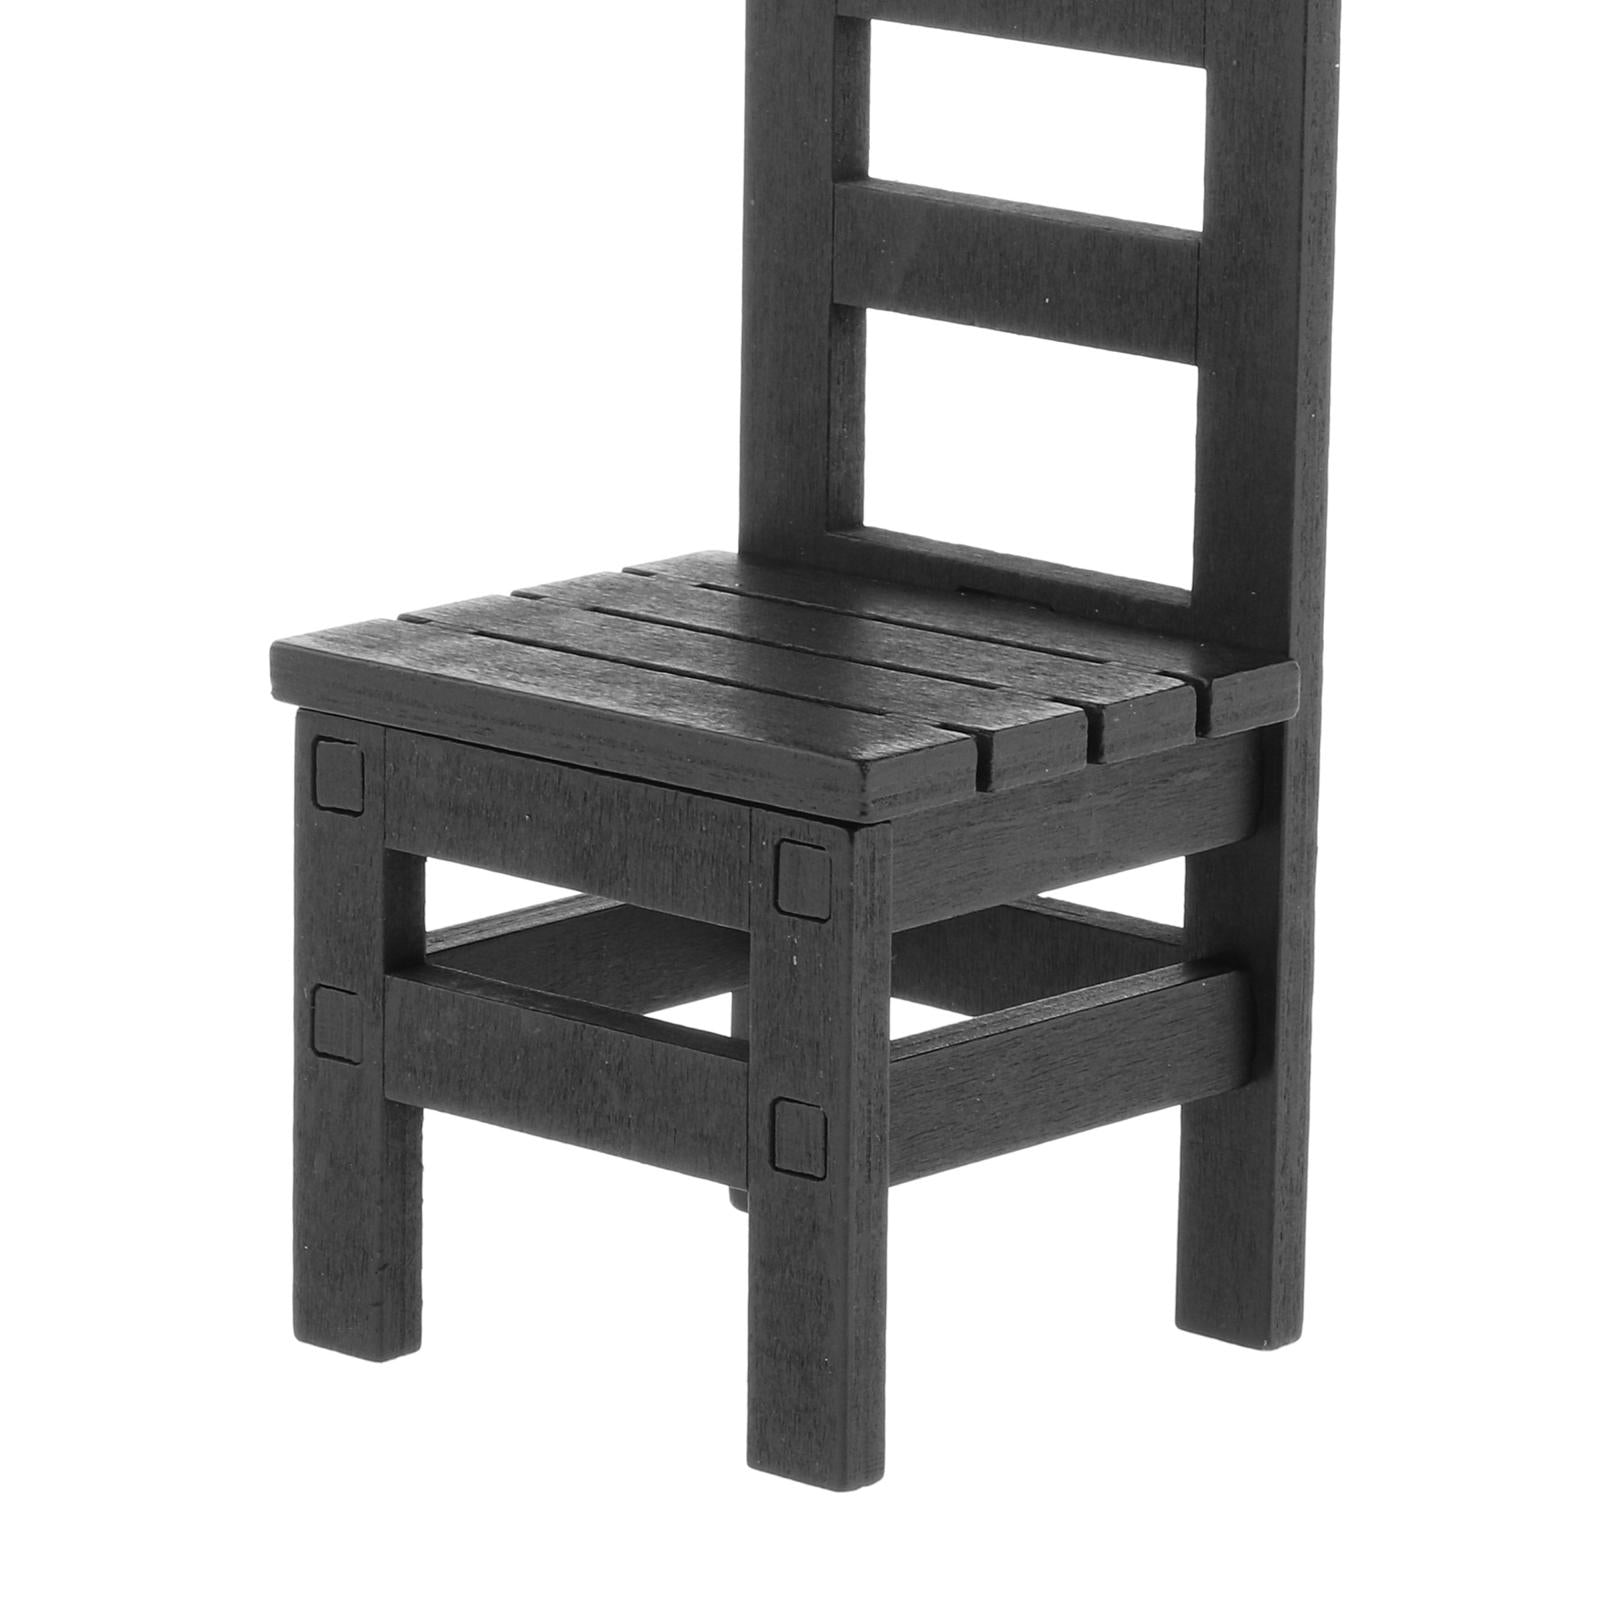 1/6 Scale Furniture for 12" Action Figures Miniature Furniture Chair Black